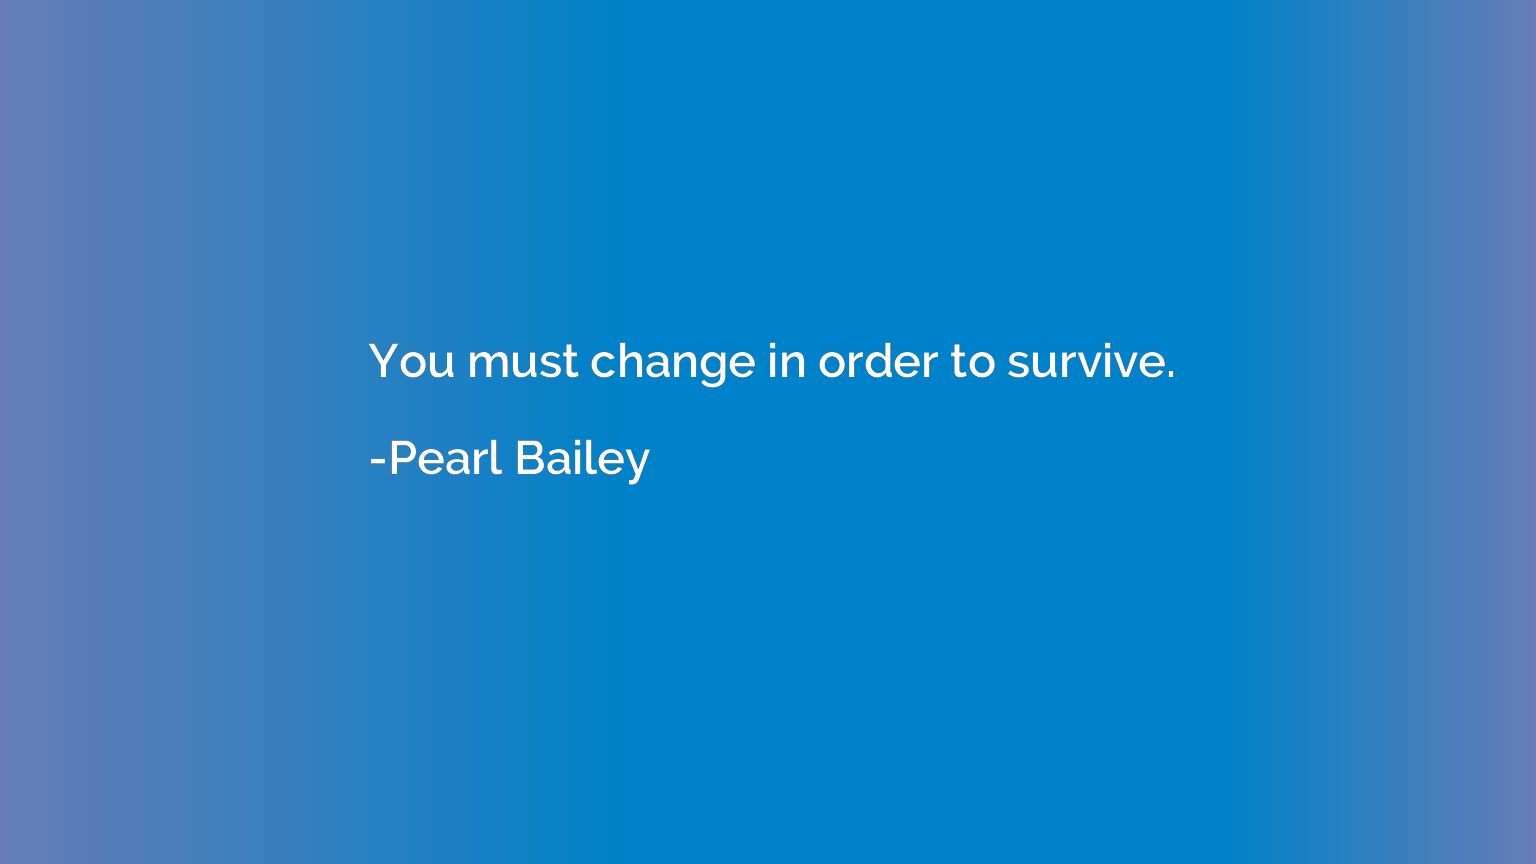 You must change in order to survive.